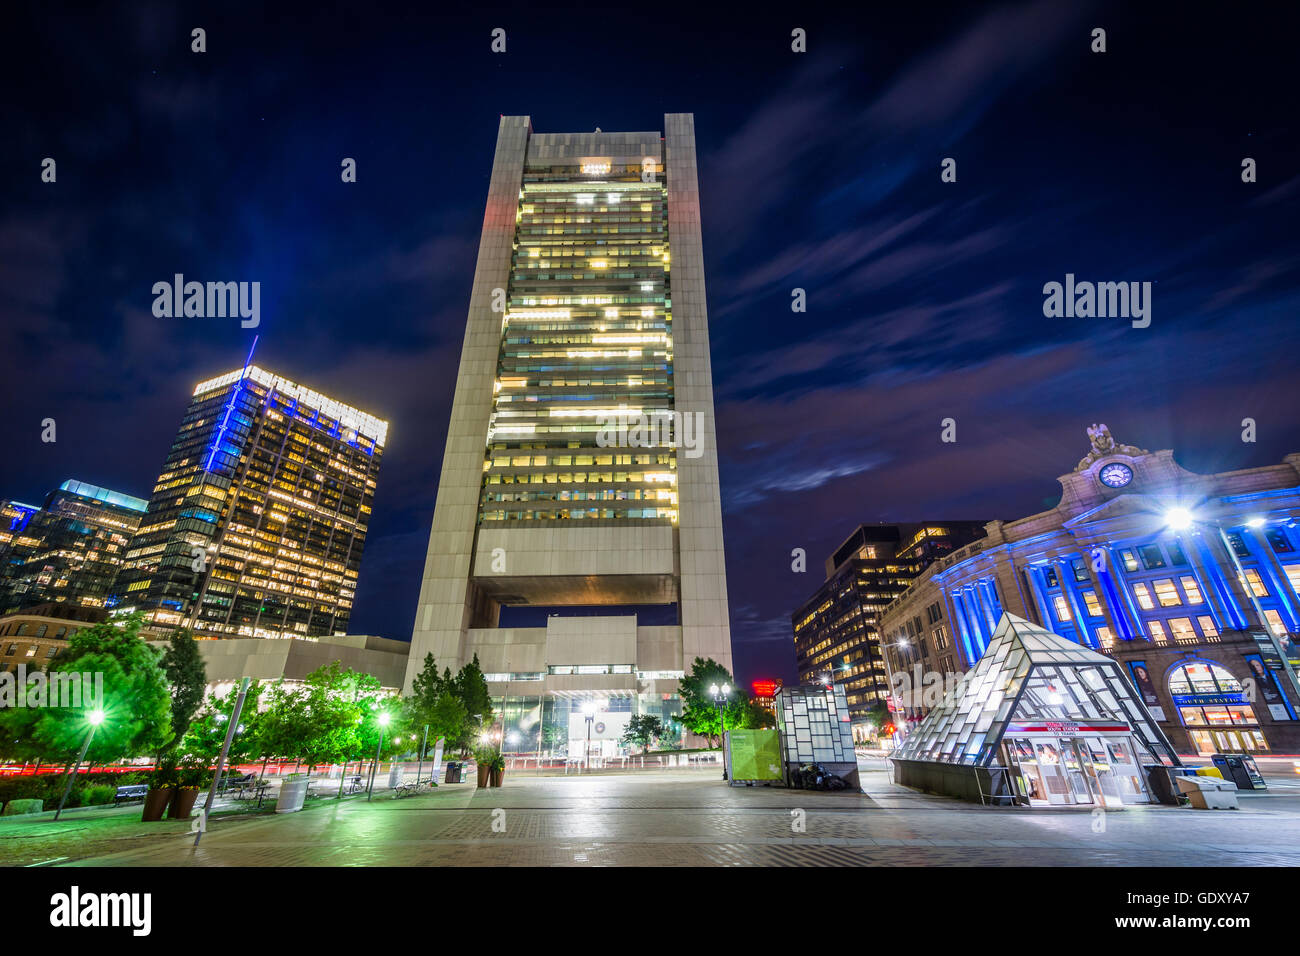 The Federal Reserve Bank of Boston and Federal Reserve Plaza Park at night, in the Financial District, Boston, Massachusetts. Stock Photo